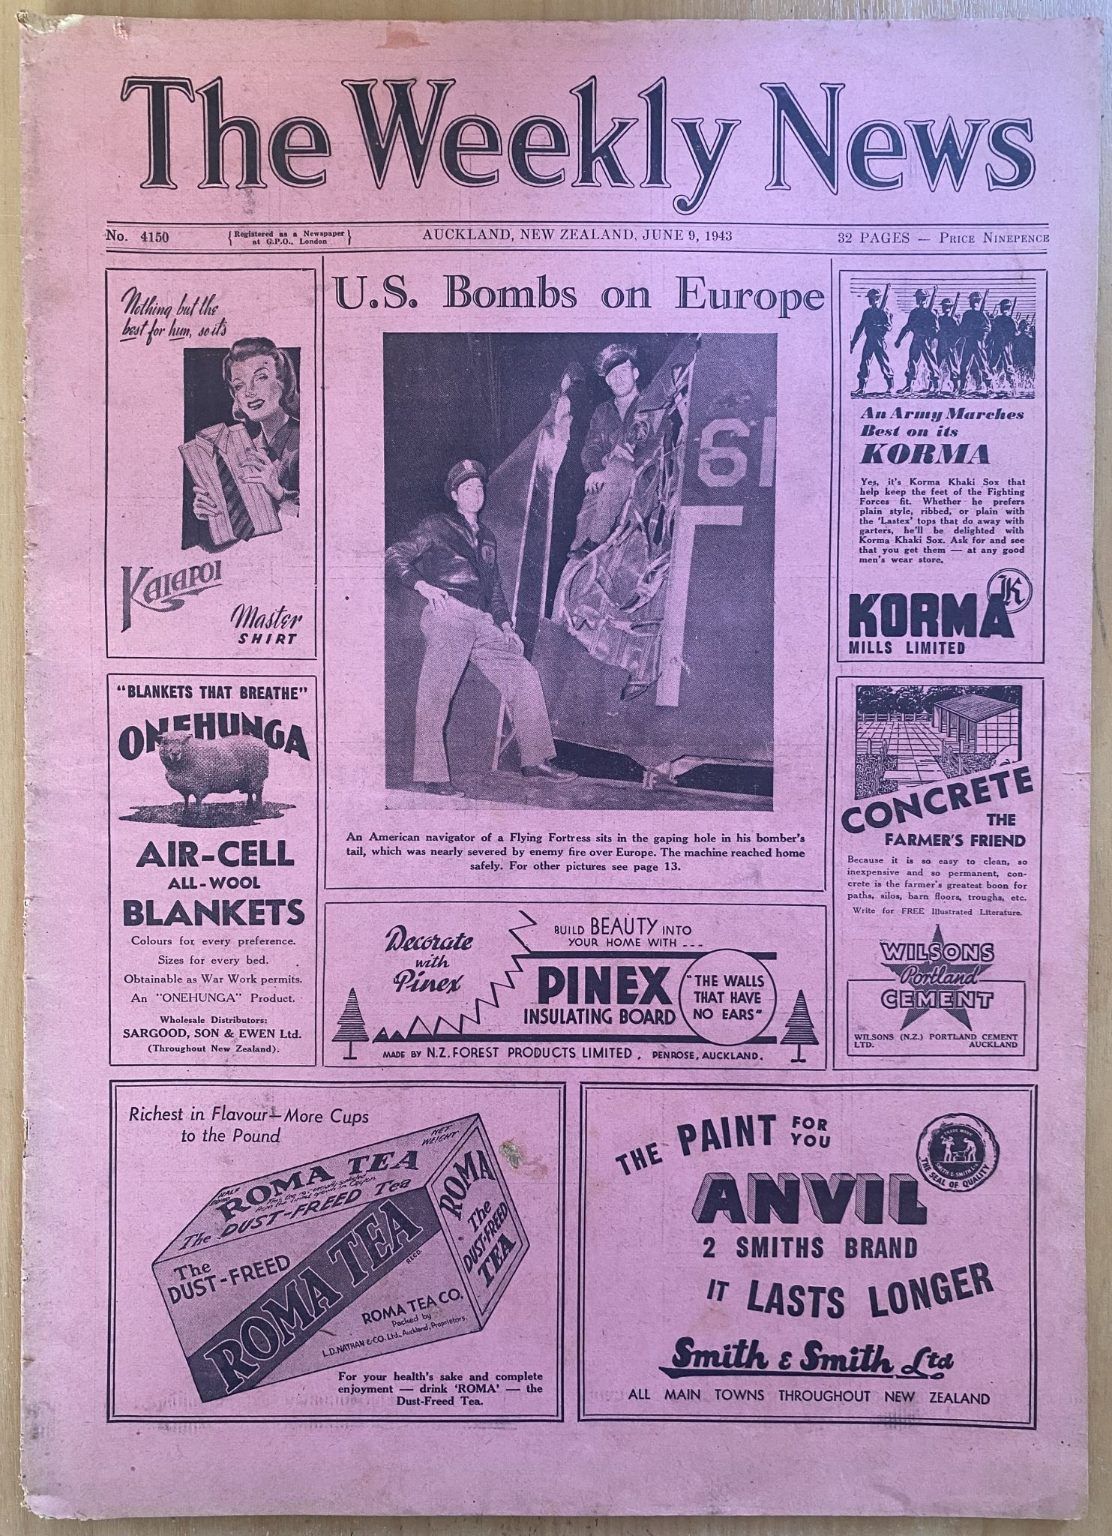 OLD NEWSPAPER: The Weekly News - No. 4150, 9 June 1943